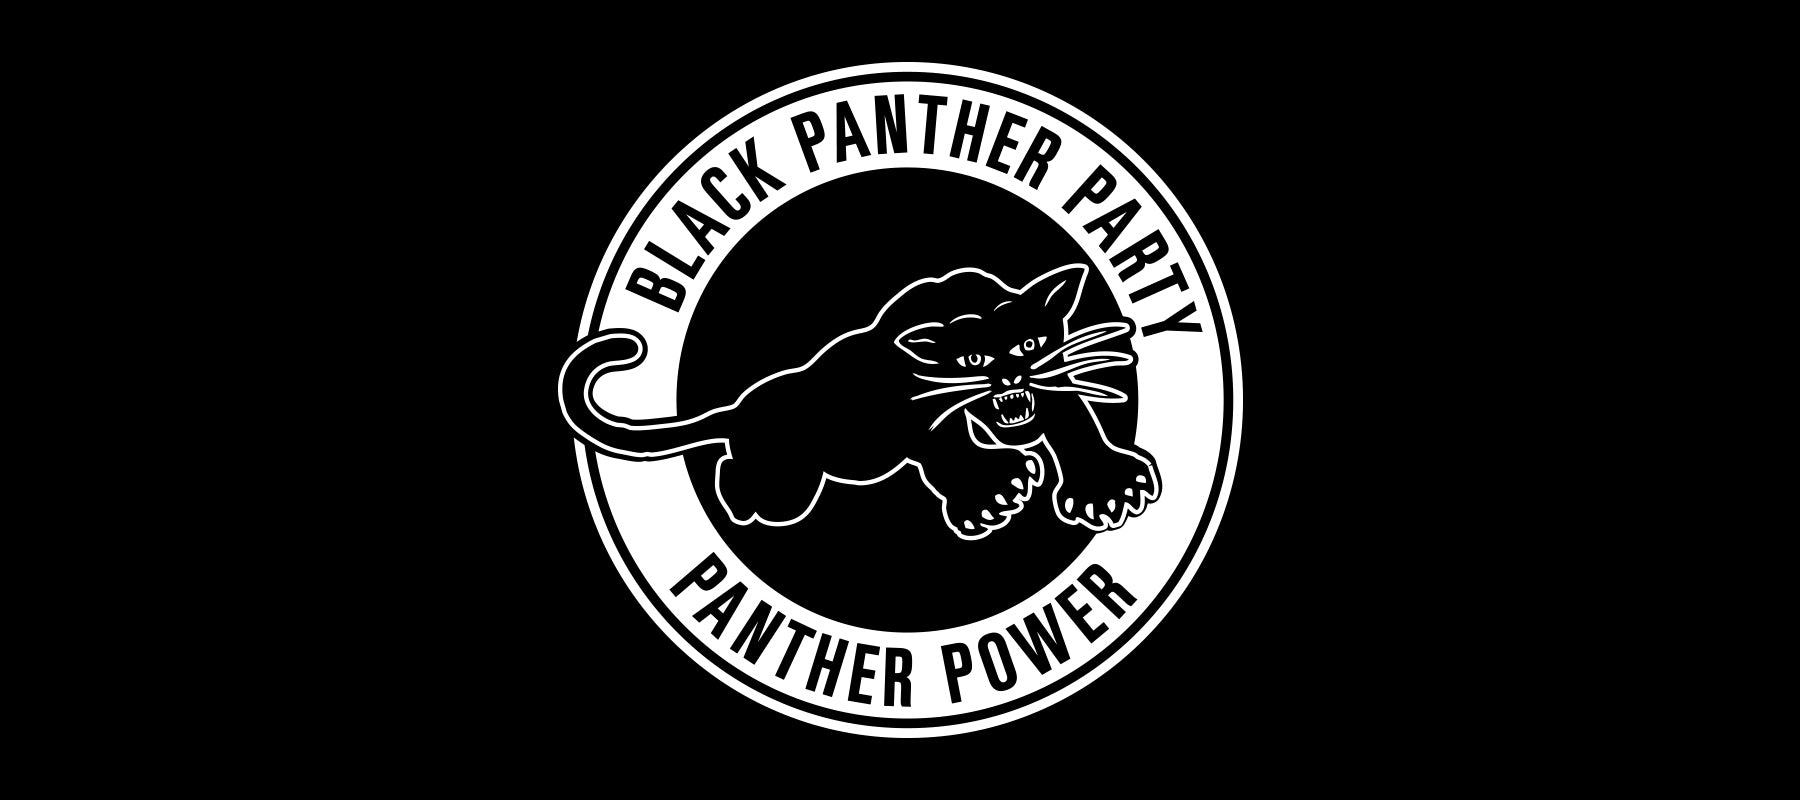 Logo - Black Panther Party Panther Power Est. 1966 Oakland, CA 